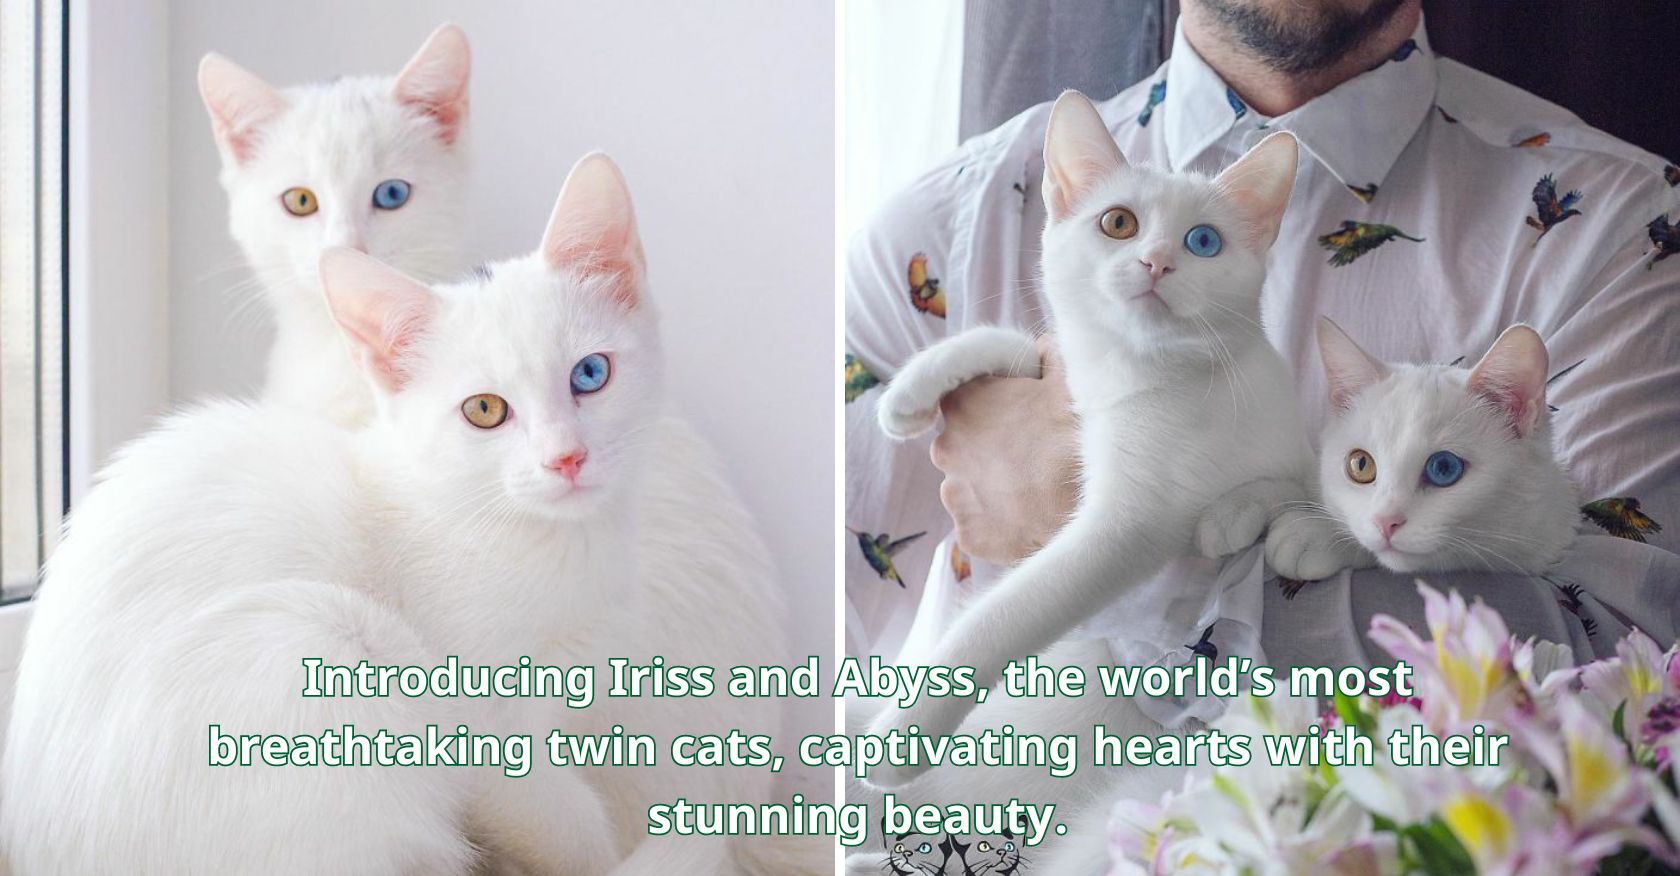 Introducing Iriss and Abyss, the world’s most breathtaking twin cats, captivating hearts with their stunning beauty.